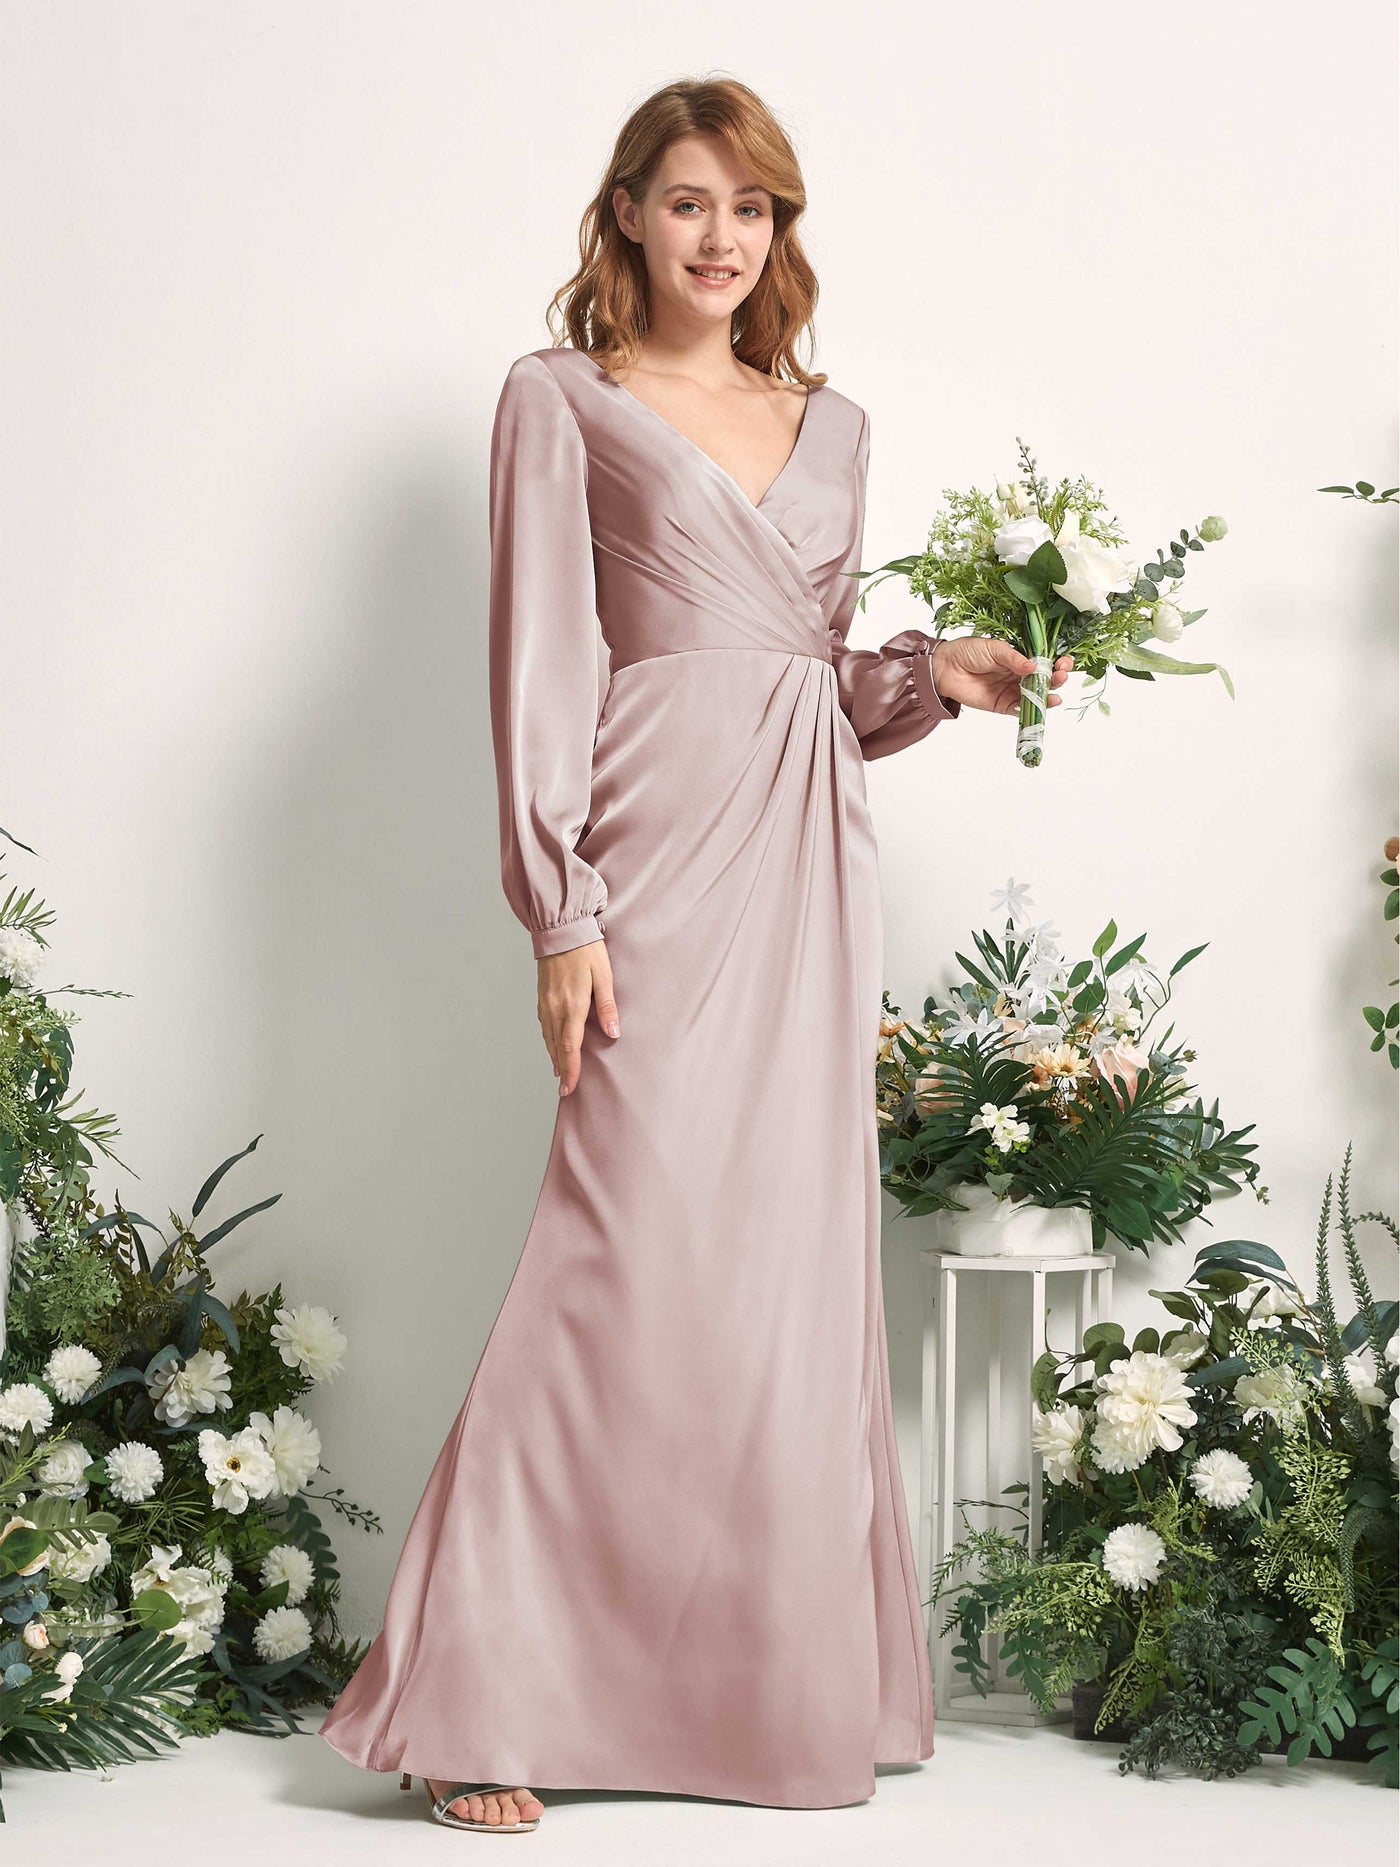 Dusty Rose Bridesmaid Dresses Bridesmaid Dress Ball Gown Satin V-neck Full Length Long Sleeves Wedding Party Dress (80225154)#color_dusty-rose